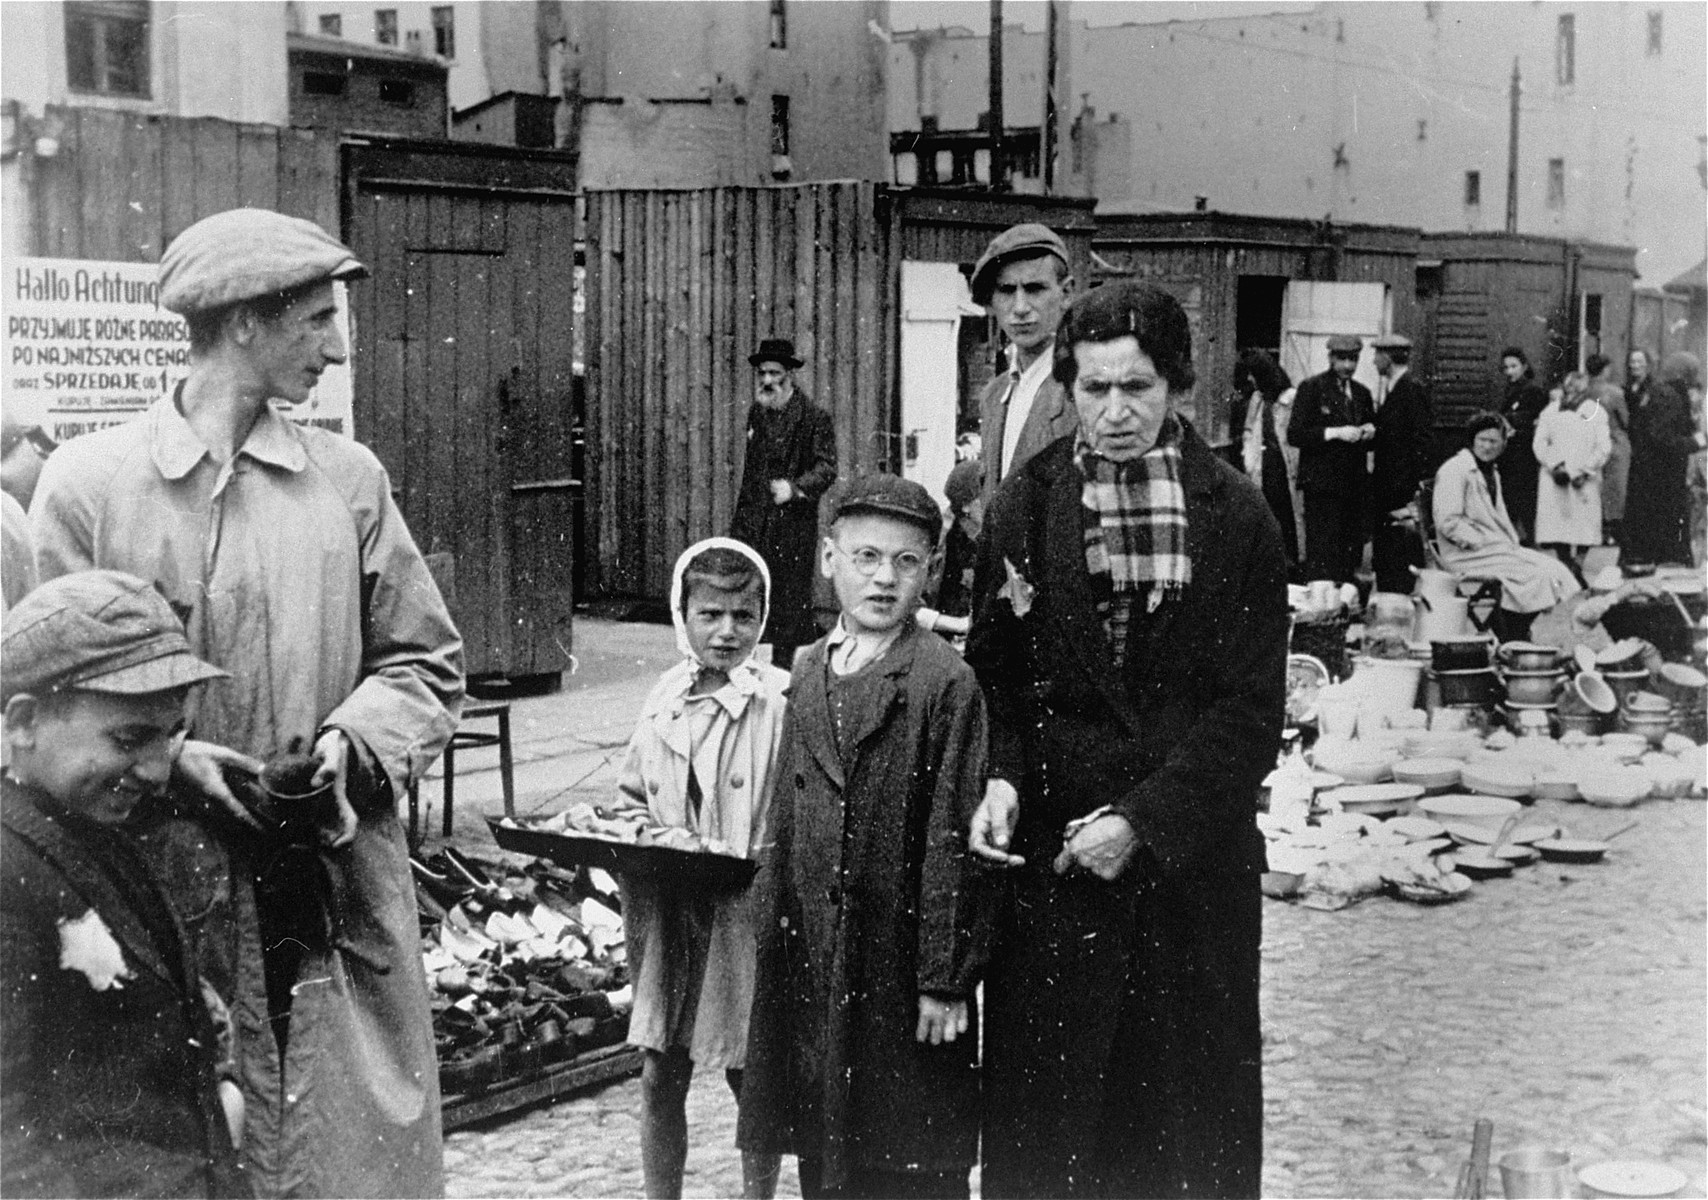 People at the outdoor market in the Lodz ghetto.  A child vendor carries her wares in a tray slung around her neck.